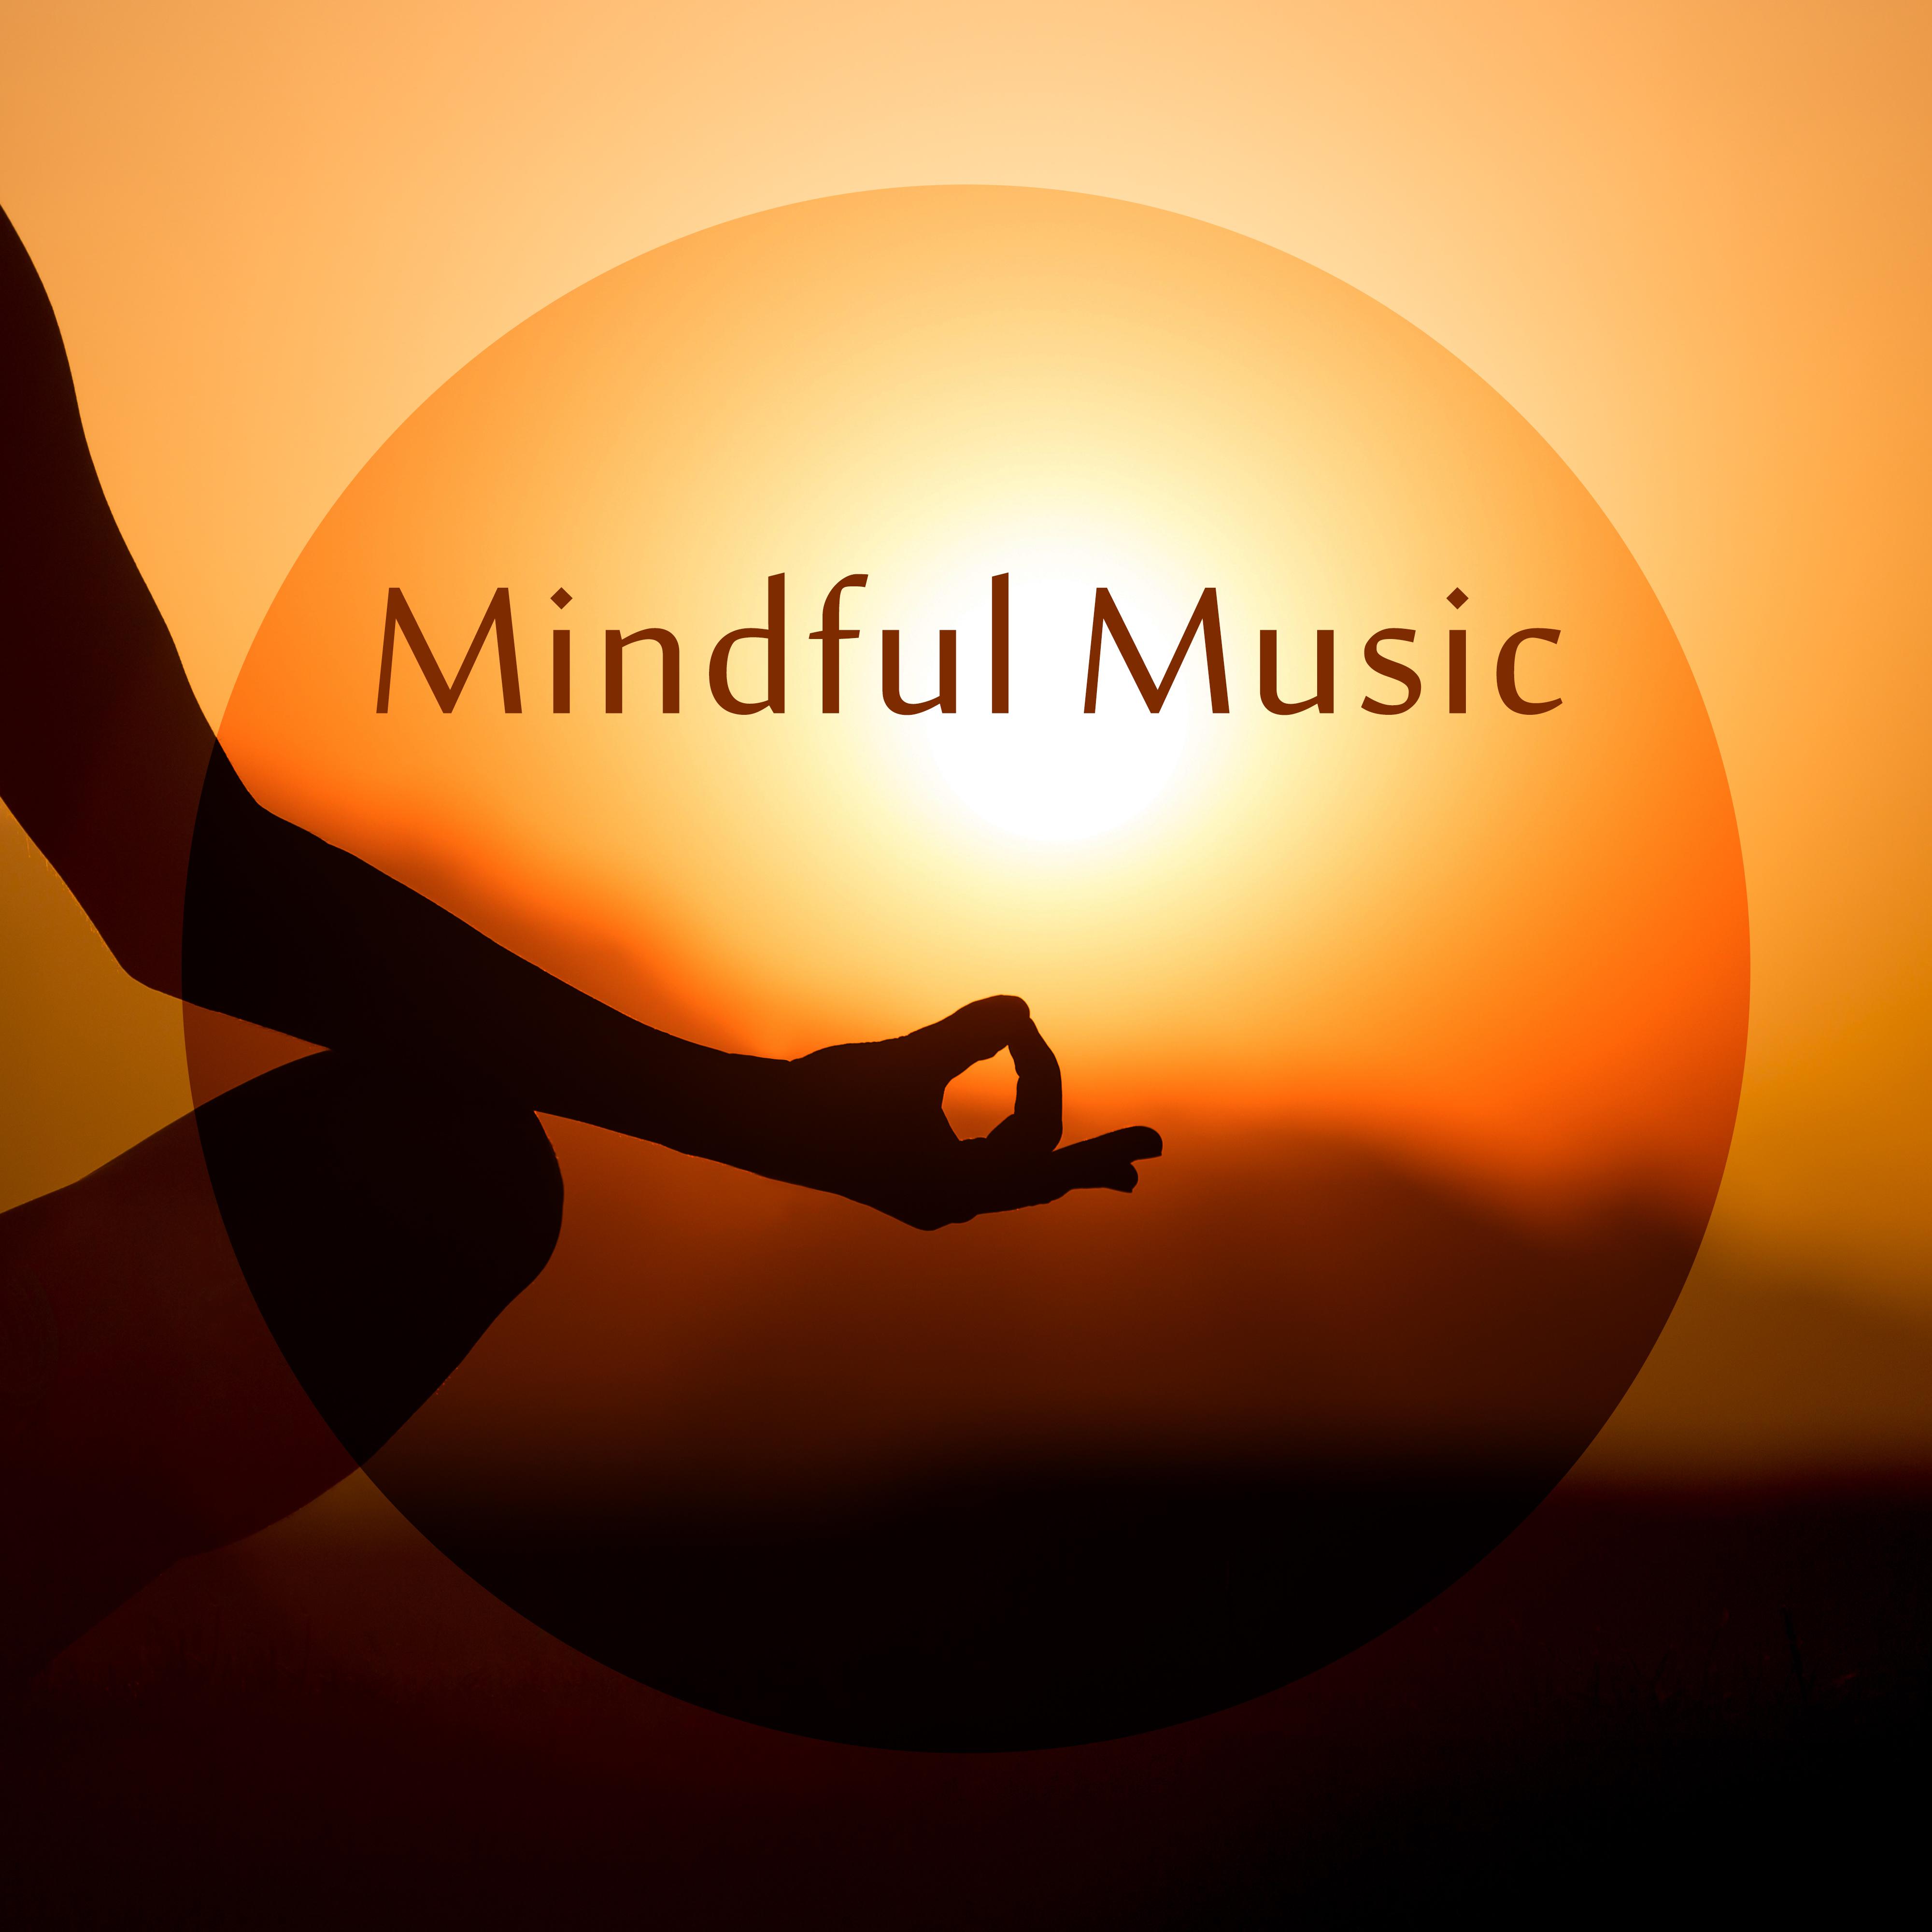 Mindful Music – Meditation Music Zone, Zone for Yoga, Mantra in Meditation, Ambient Yoga, Healing Music to Rest, Pure Mind, Inner Harmony